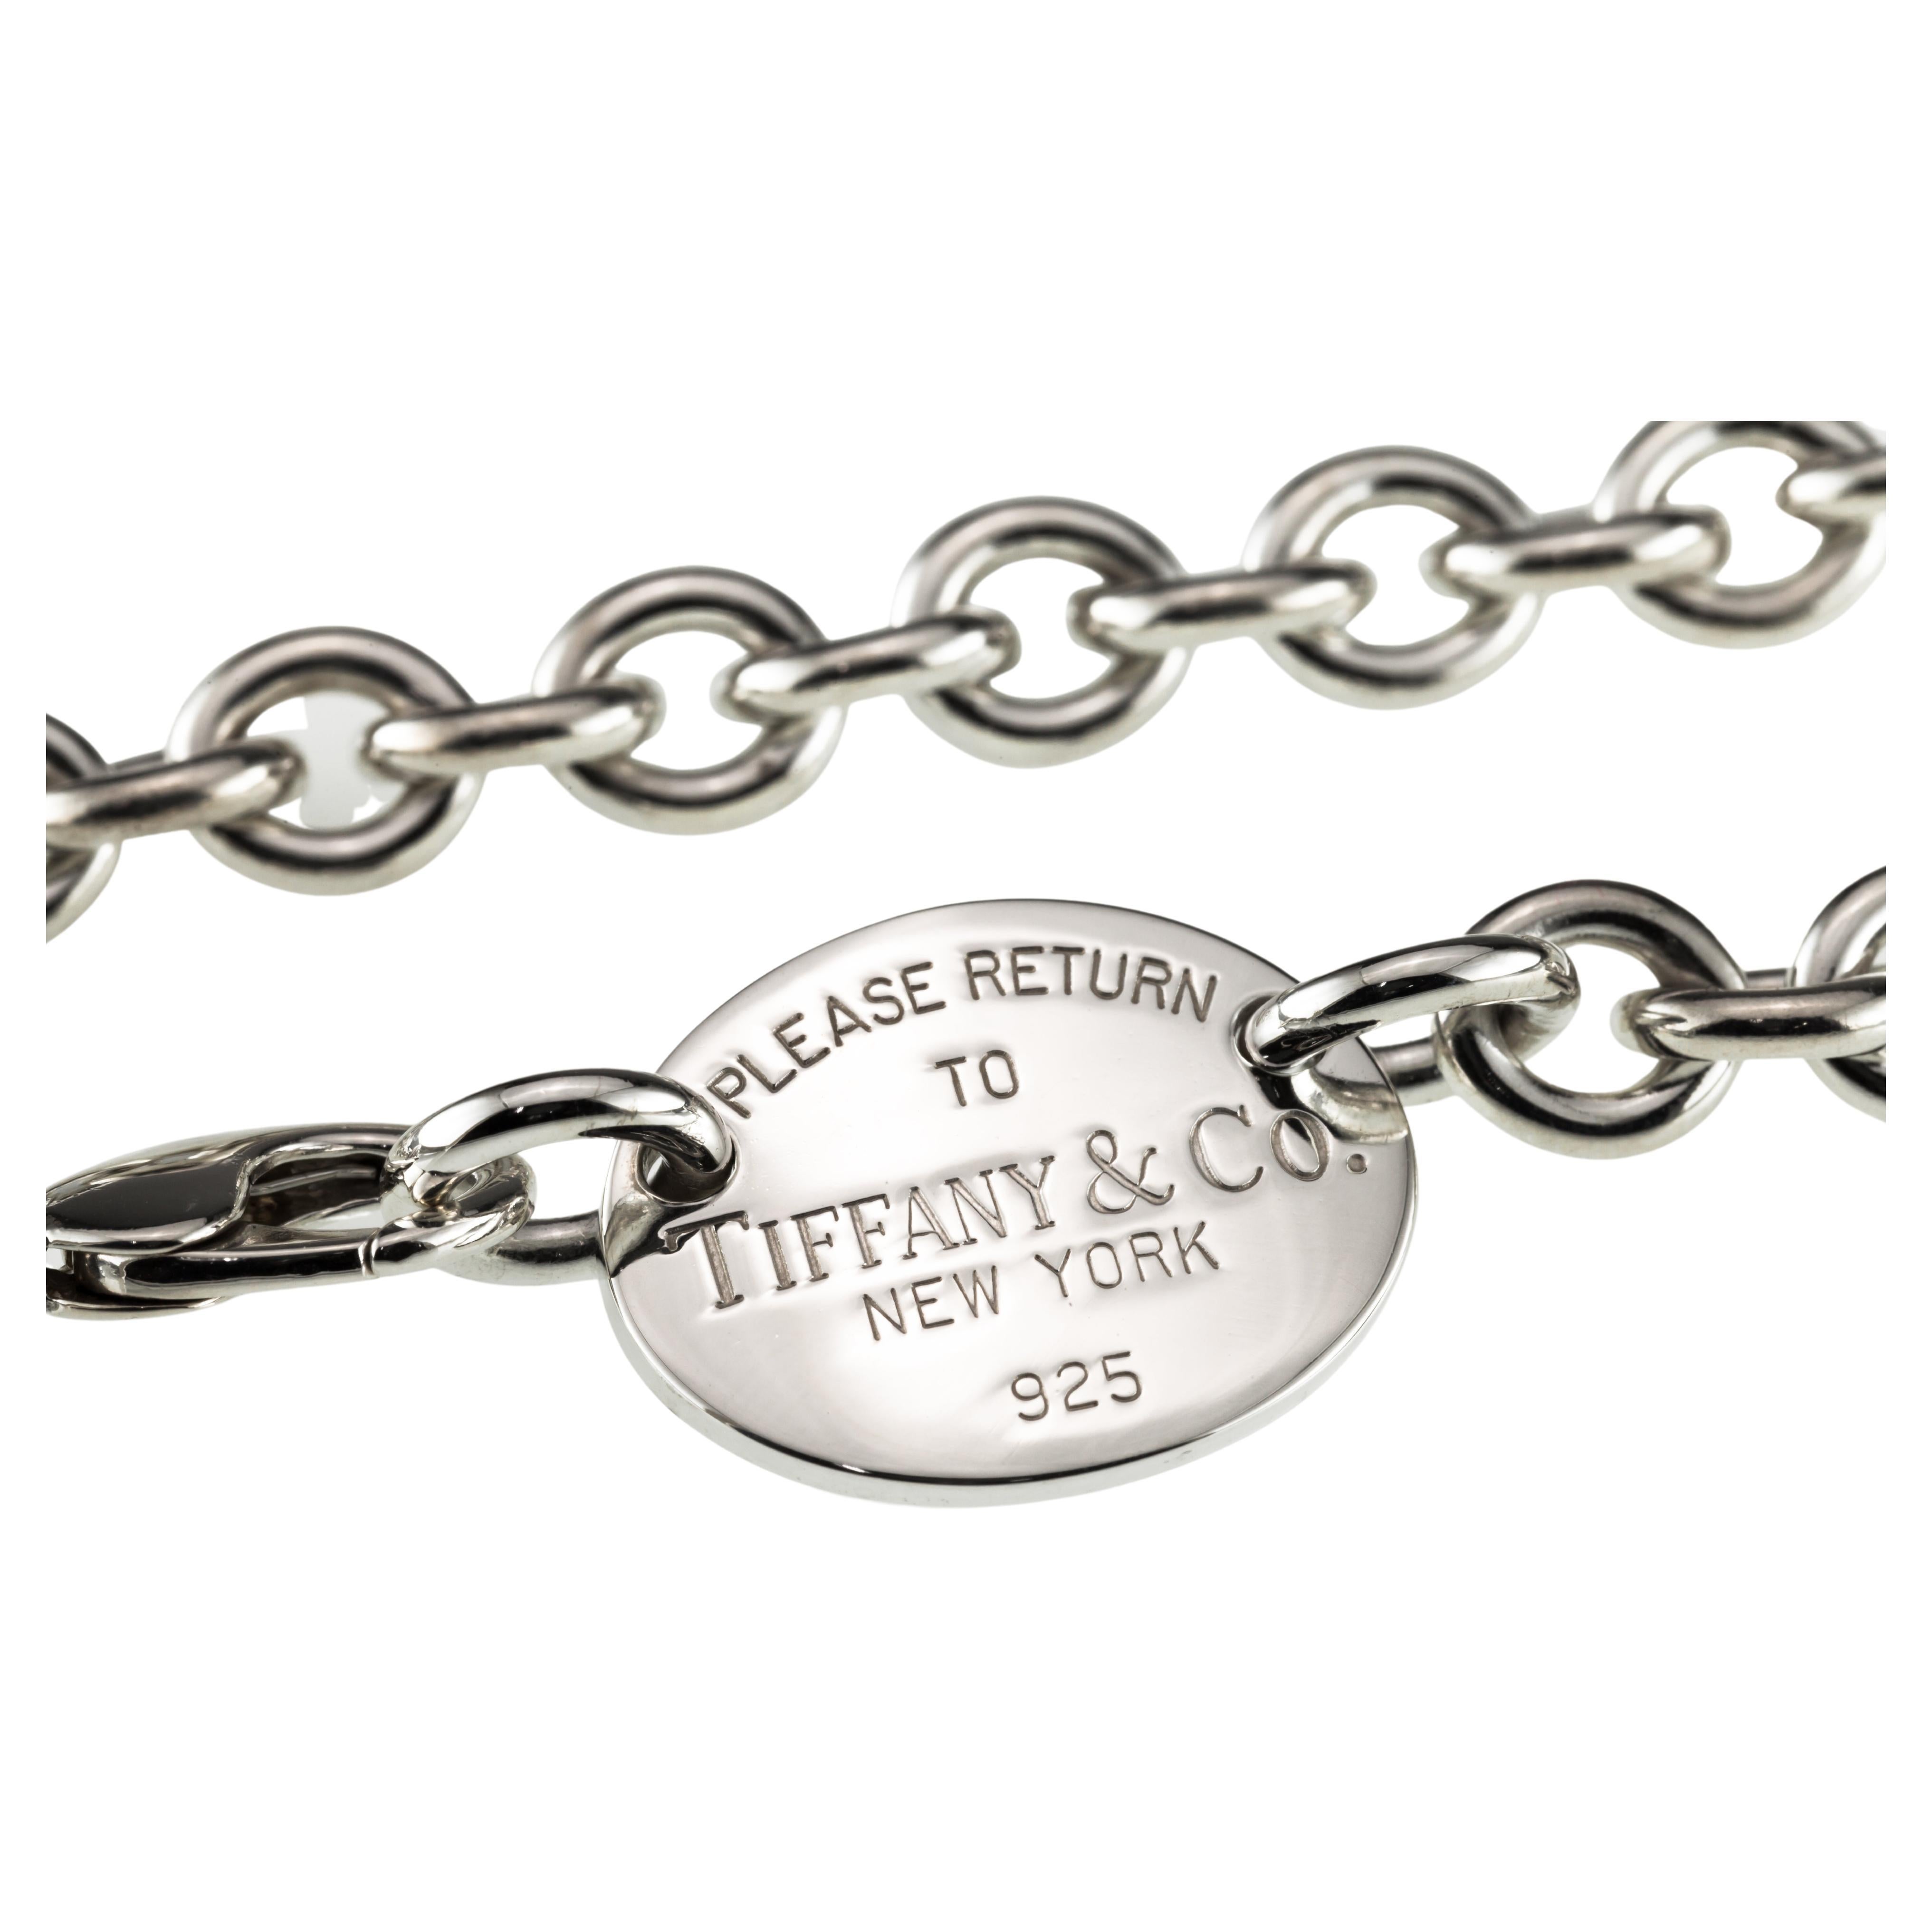 Tiffany & Co. Sterling Silver "Return to Tiffany" Oval Tag Charm Necklace